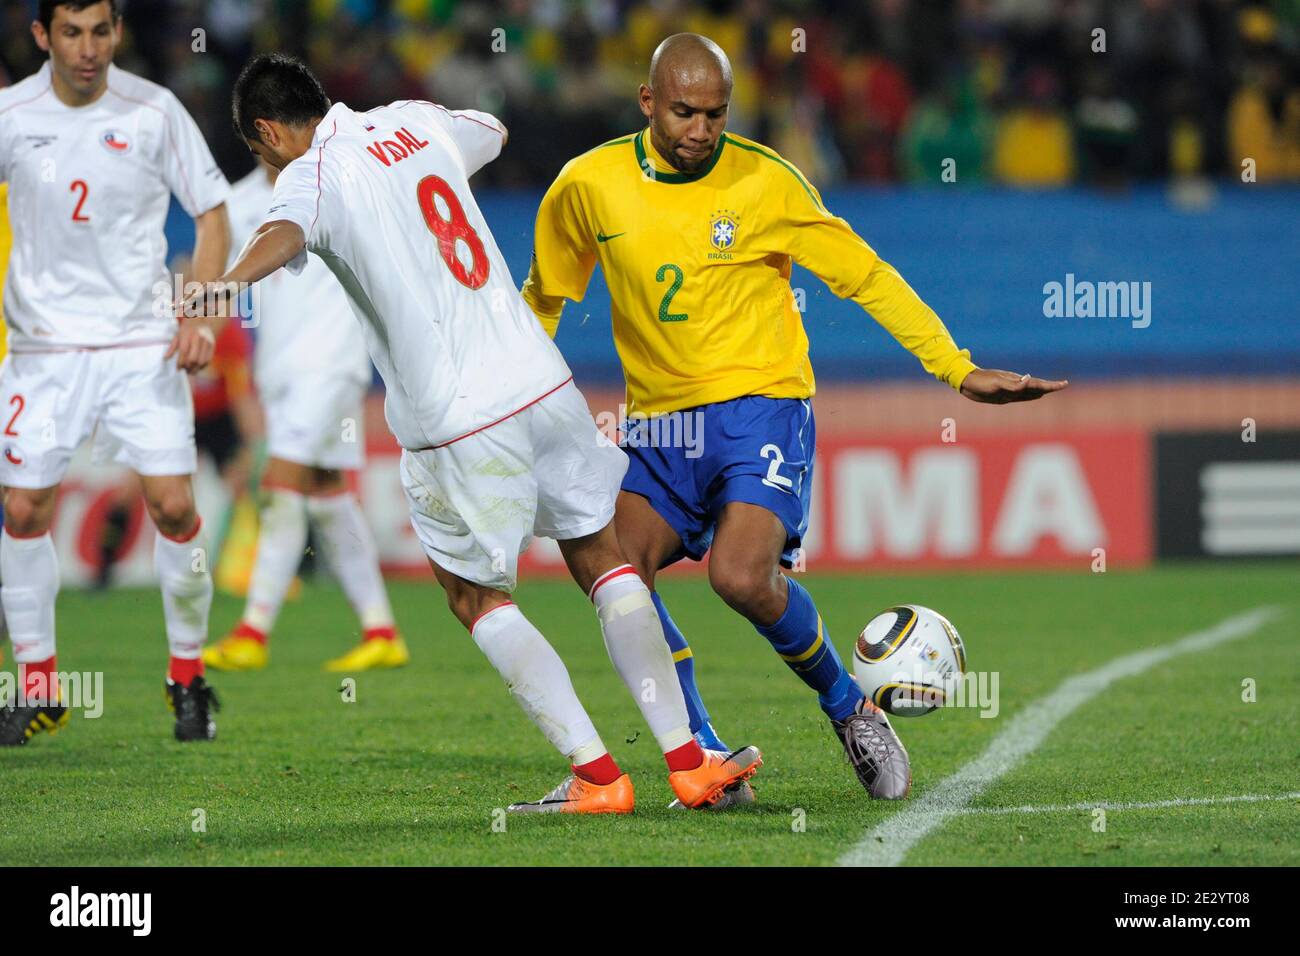 Brazil's Maicon battles Chile's Arturo Vidal during the 2010 FIFA World Cup  South Africa 1/8 of final Soccer match, Brazil vs Chile at Ellis Park  football stadium in Johannesburg, South Africa on